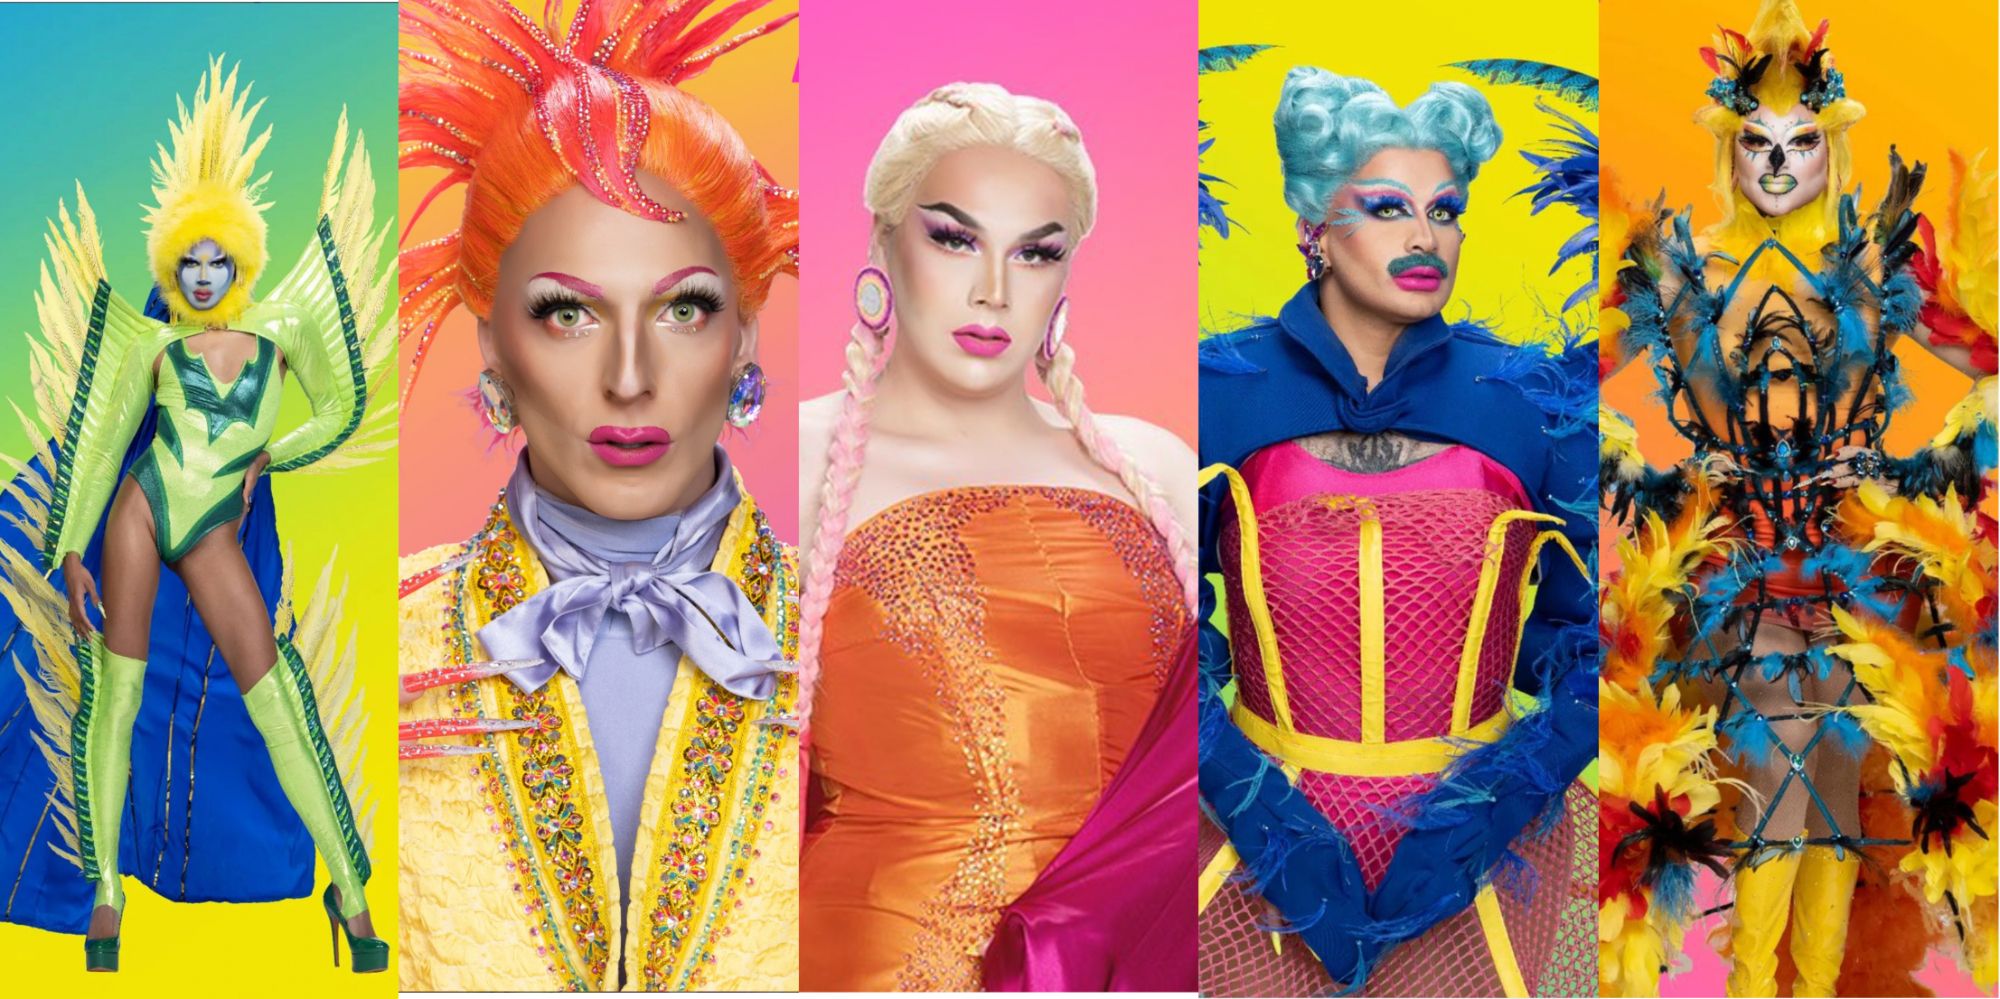 Canada S Drag Race Where To Find The Season 3 Queens On Social Media